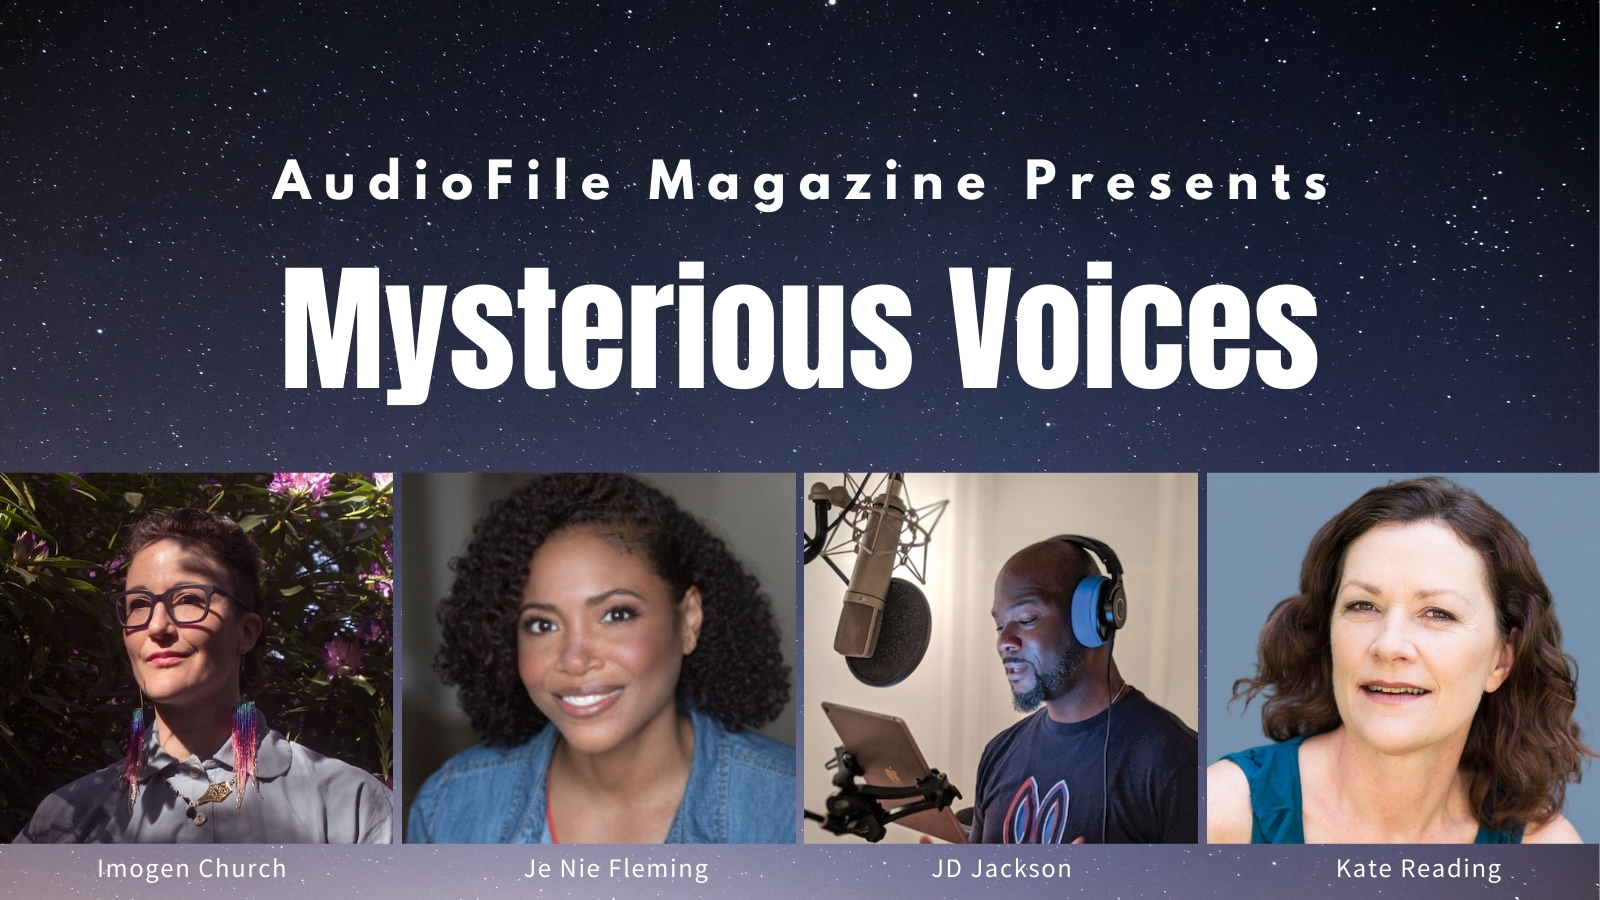 Mysterious Voices presented by AudioFile Magazine